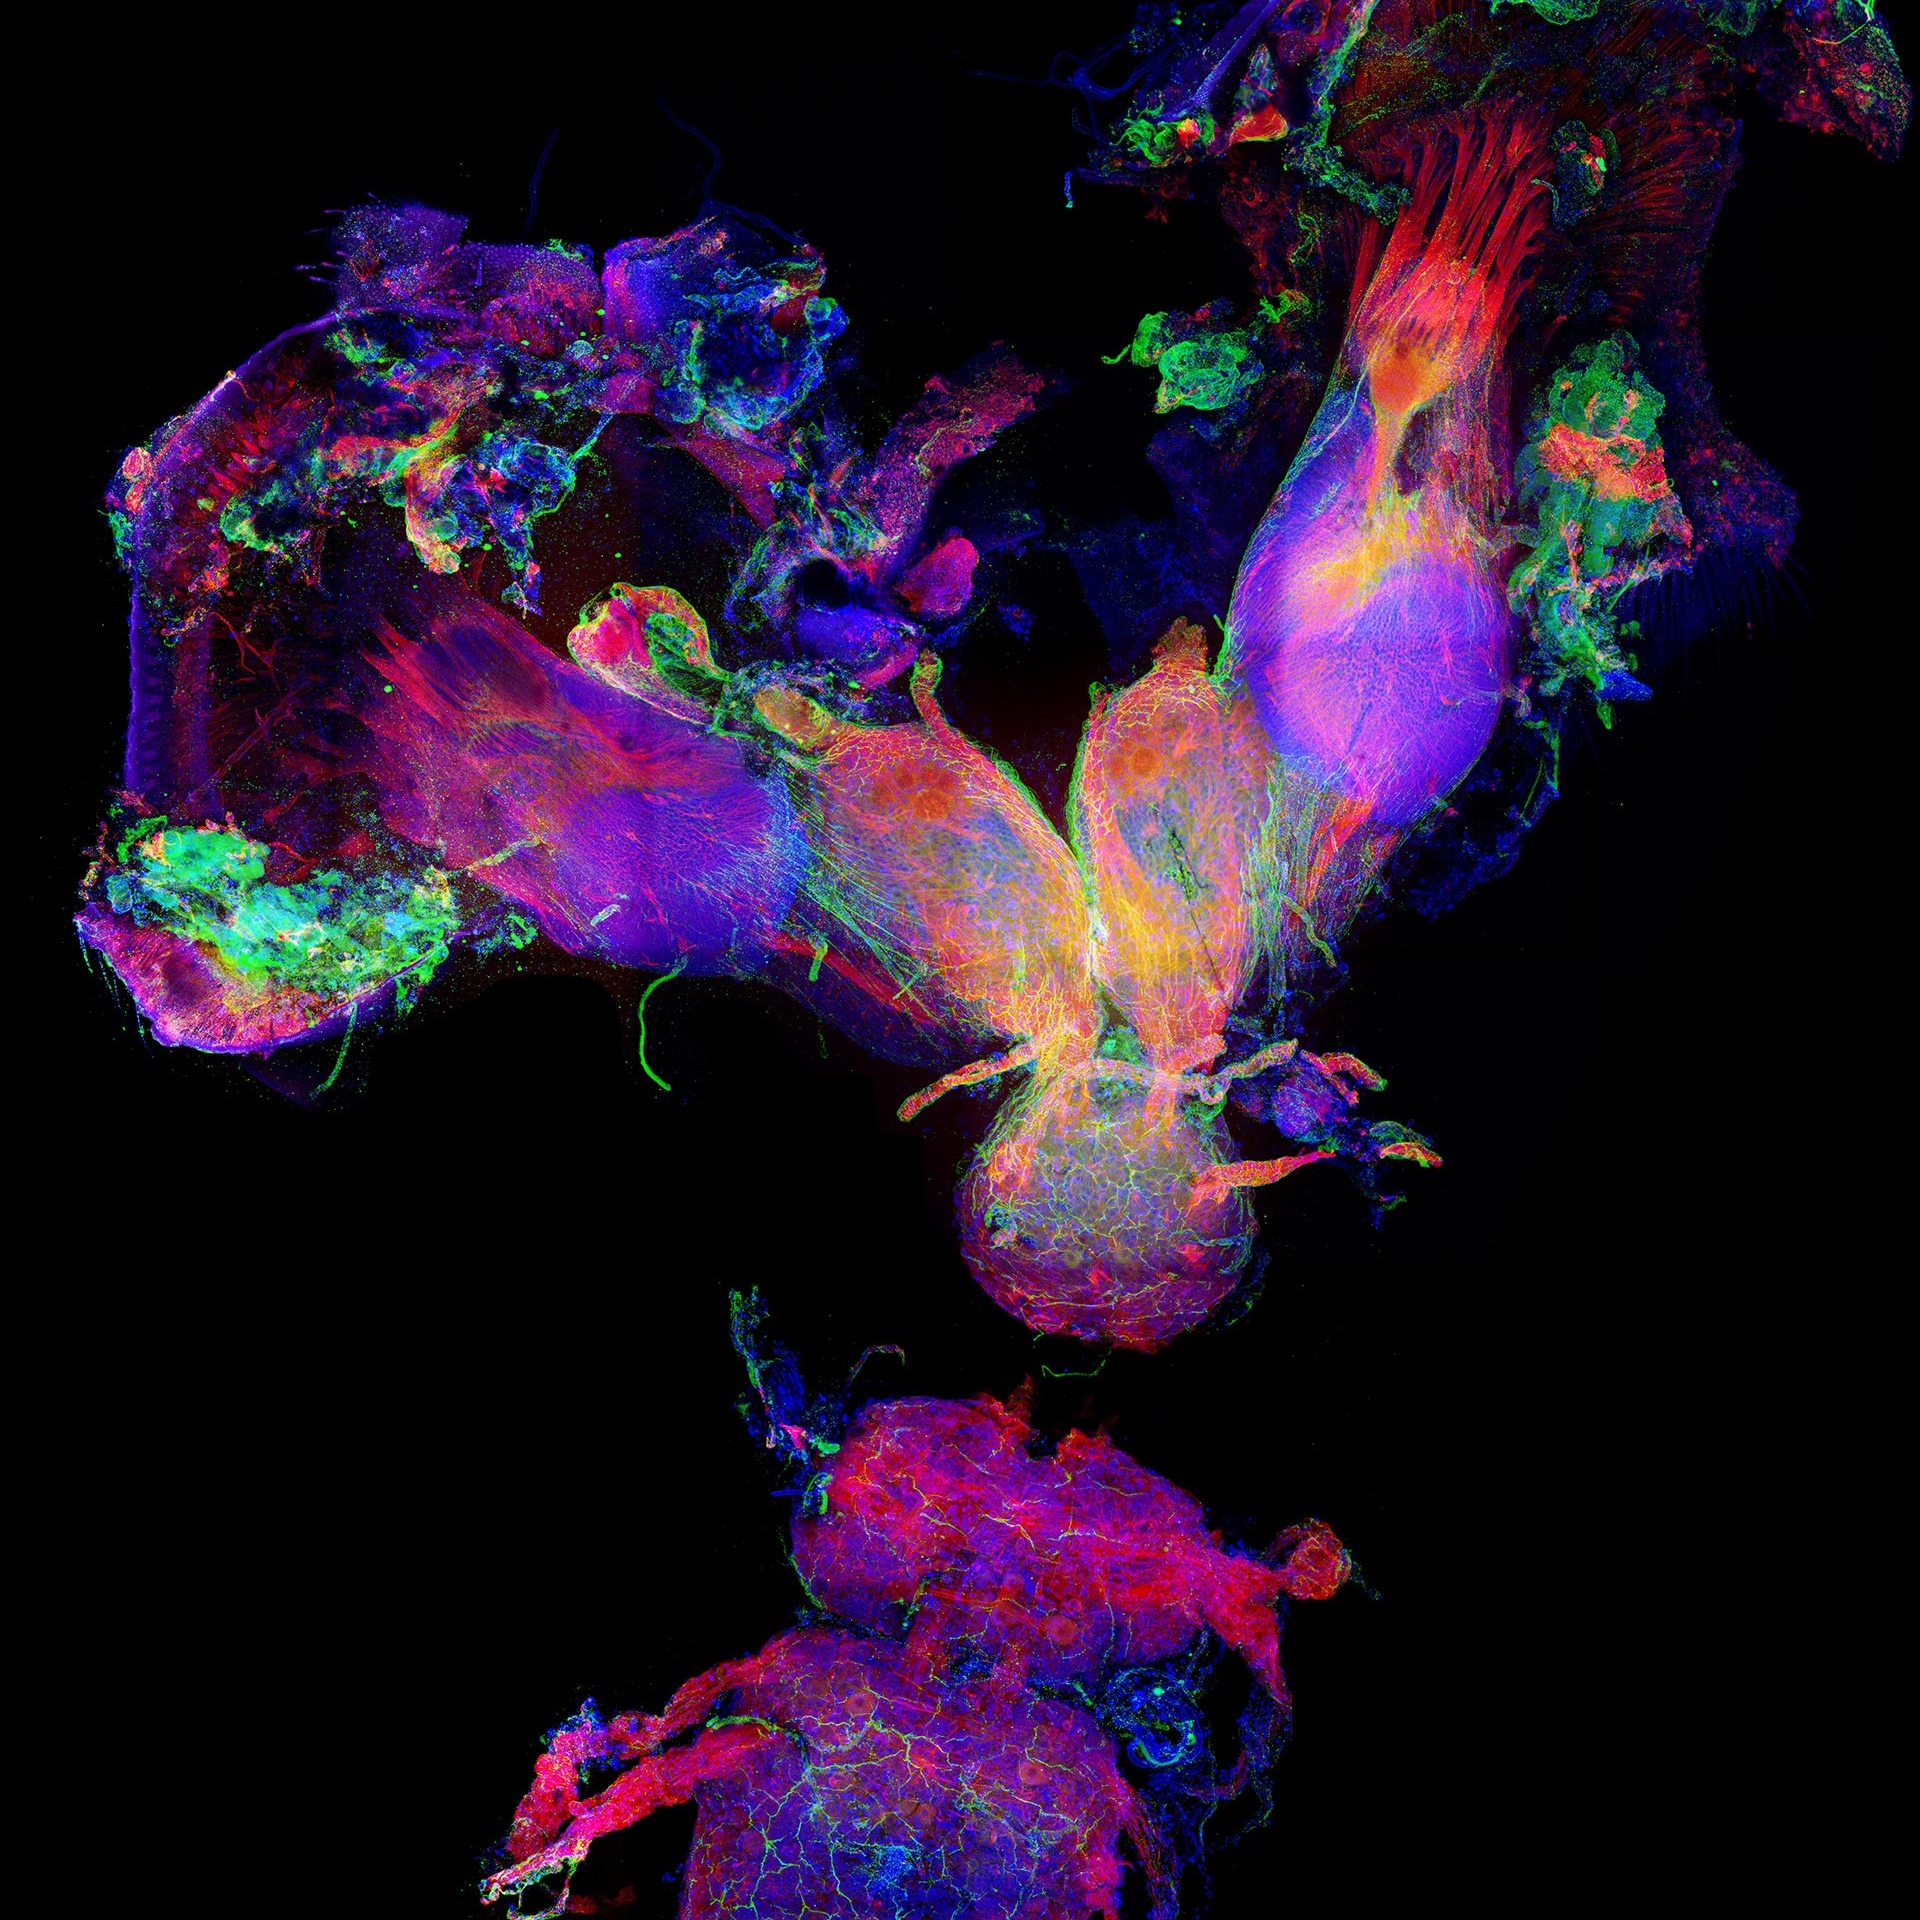 Central nervous system from a horned dung beetle (Onthophagus sagittarius) was captured during the late pupa stage, this beetle was about to complete metamorphosis. Imaged with a ZEISS LSM 880 confocal microscope.